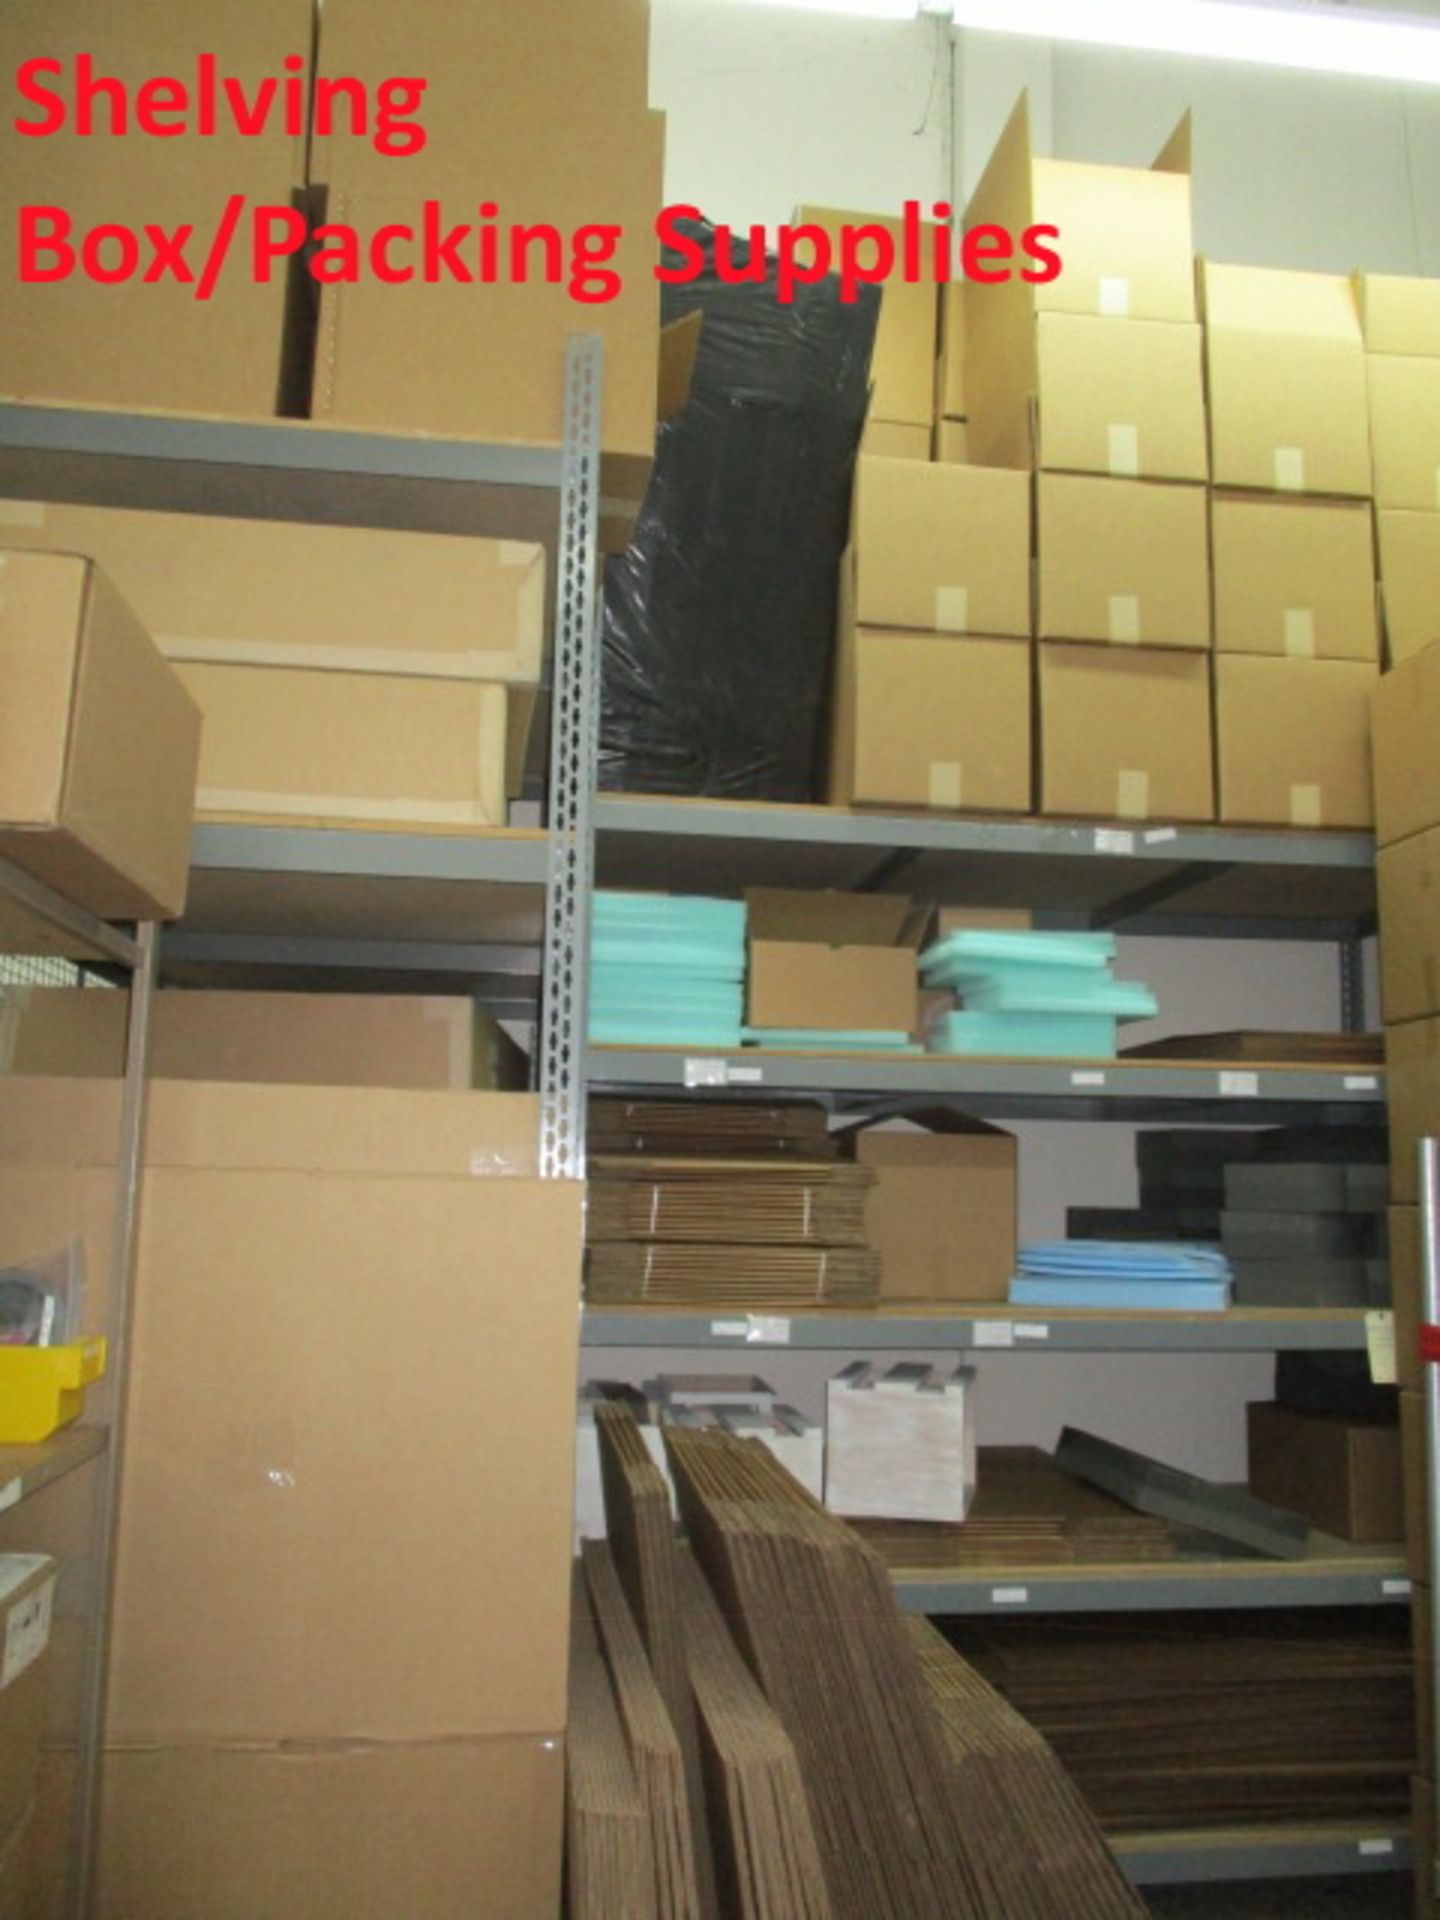 Shipping Room Furniture With Contents Of Box Packing Supplies. [Furniture: Particle-Board/Metal-